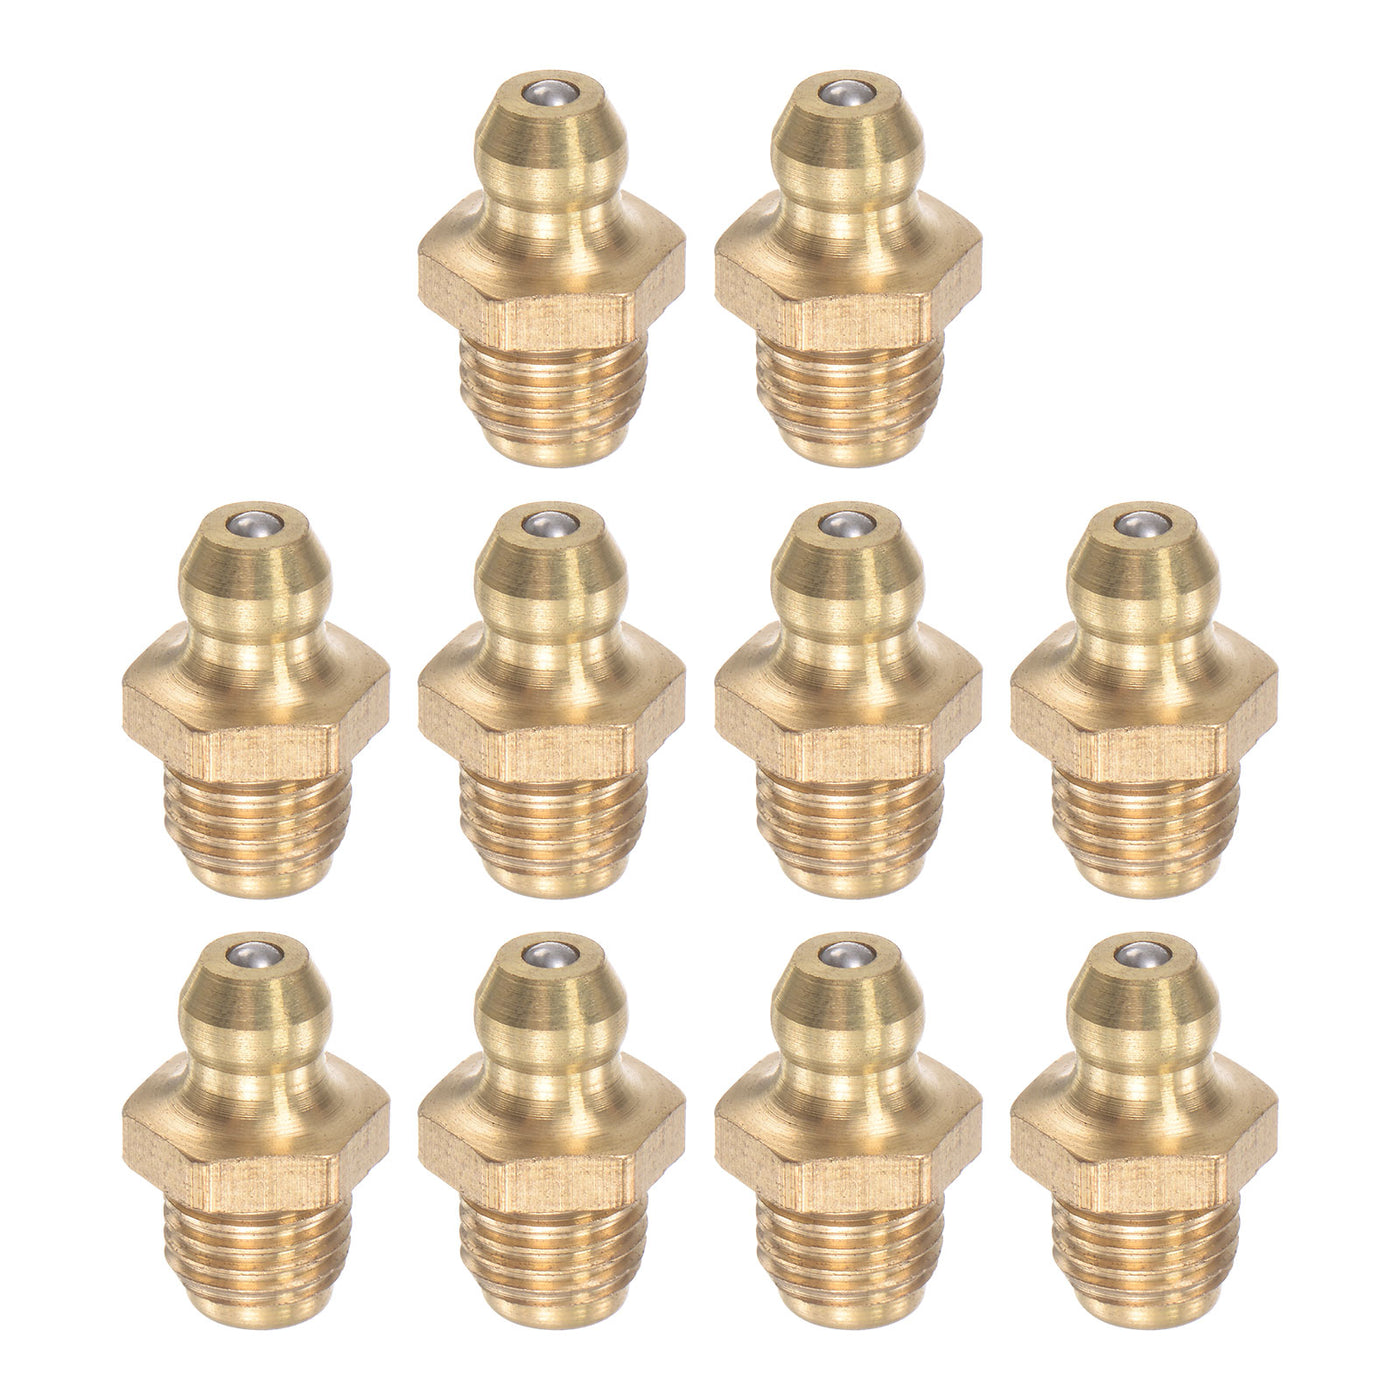 Uxcell Uxcell Brass Straight Hydraulic Grease Fitting Accessories G1/16 Thread, 10Pcs